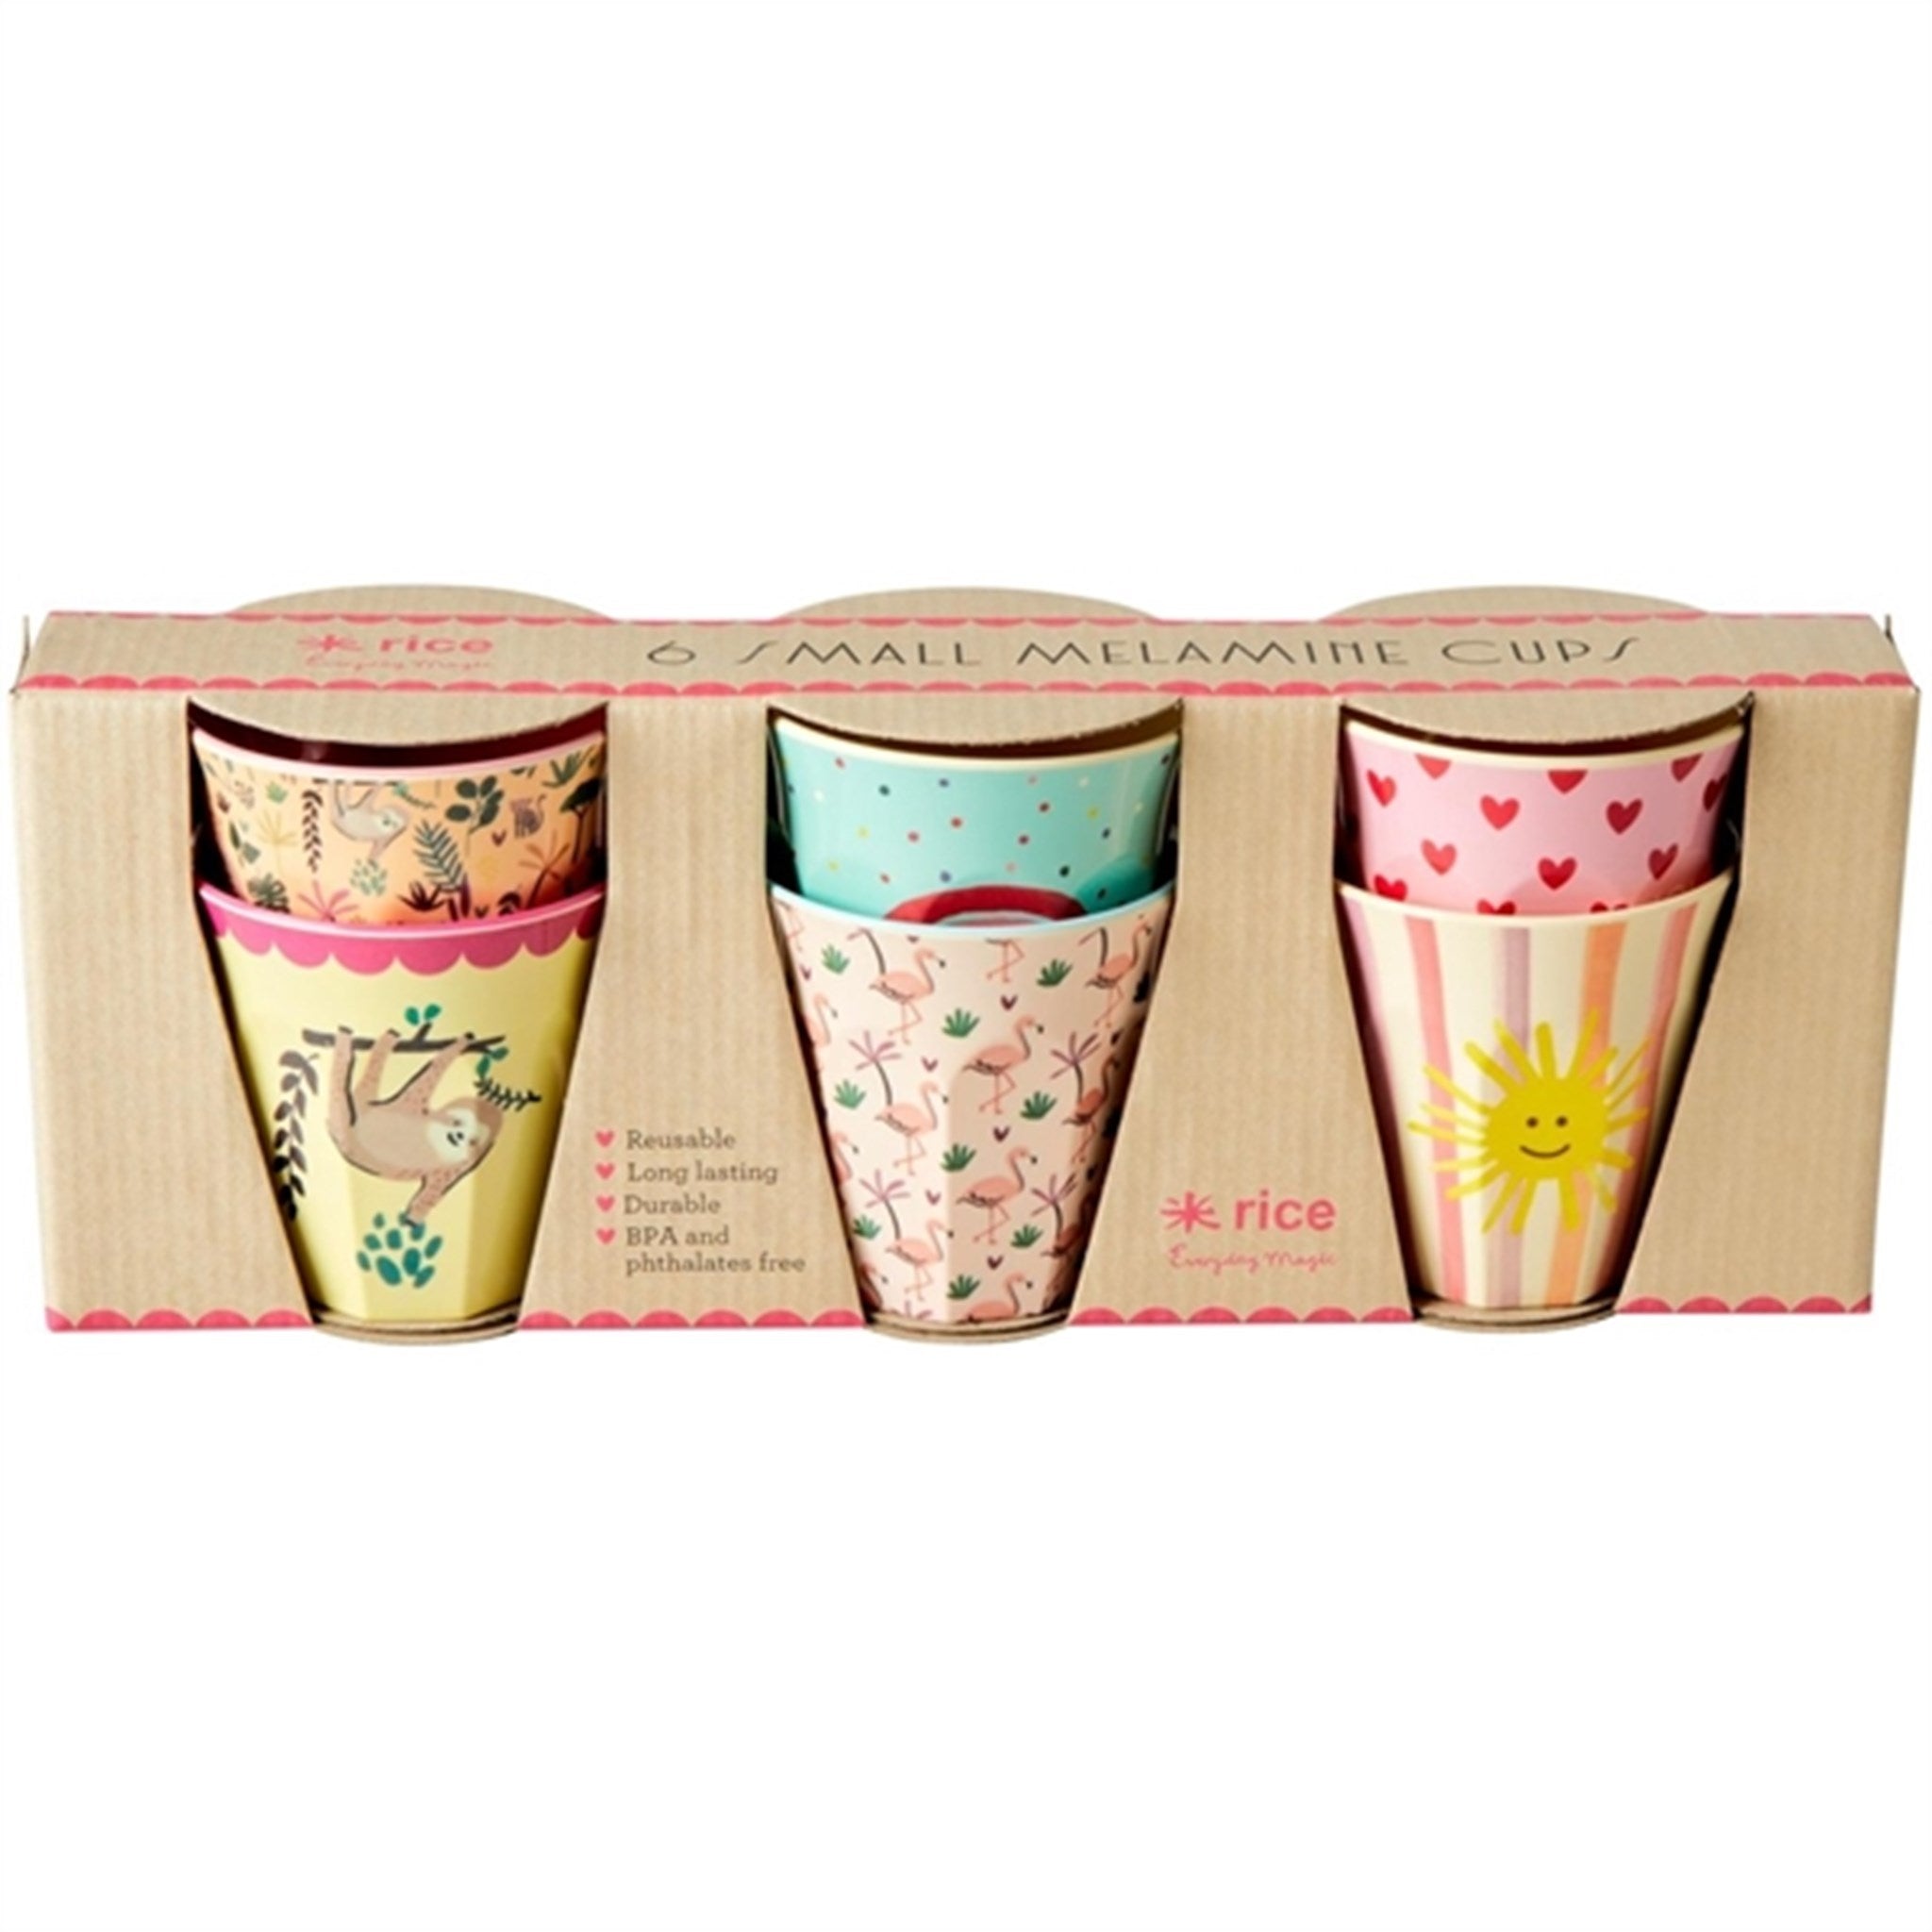 RICE Funky Prints Small Melamine Childrens Cup 6-pack